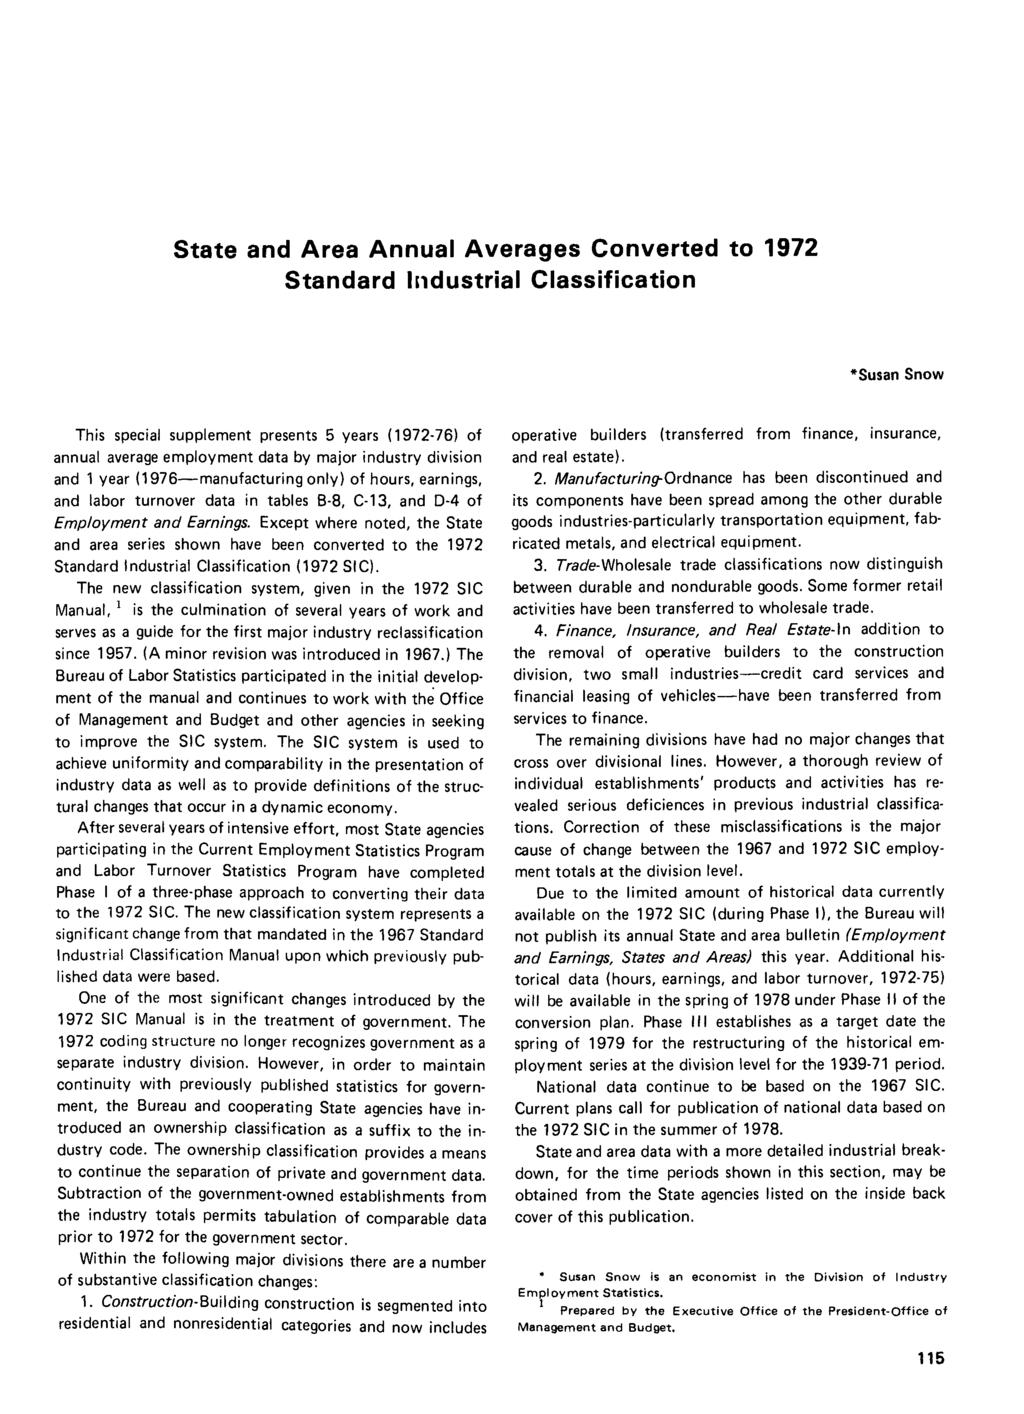 State and Area Annual Averages Converted to 1972 Standard Industrial Classification *Susan Snow This special supplement presents 5 years (1972-76) of annual average employment data by major industry